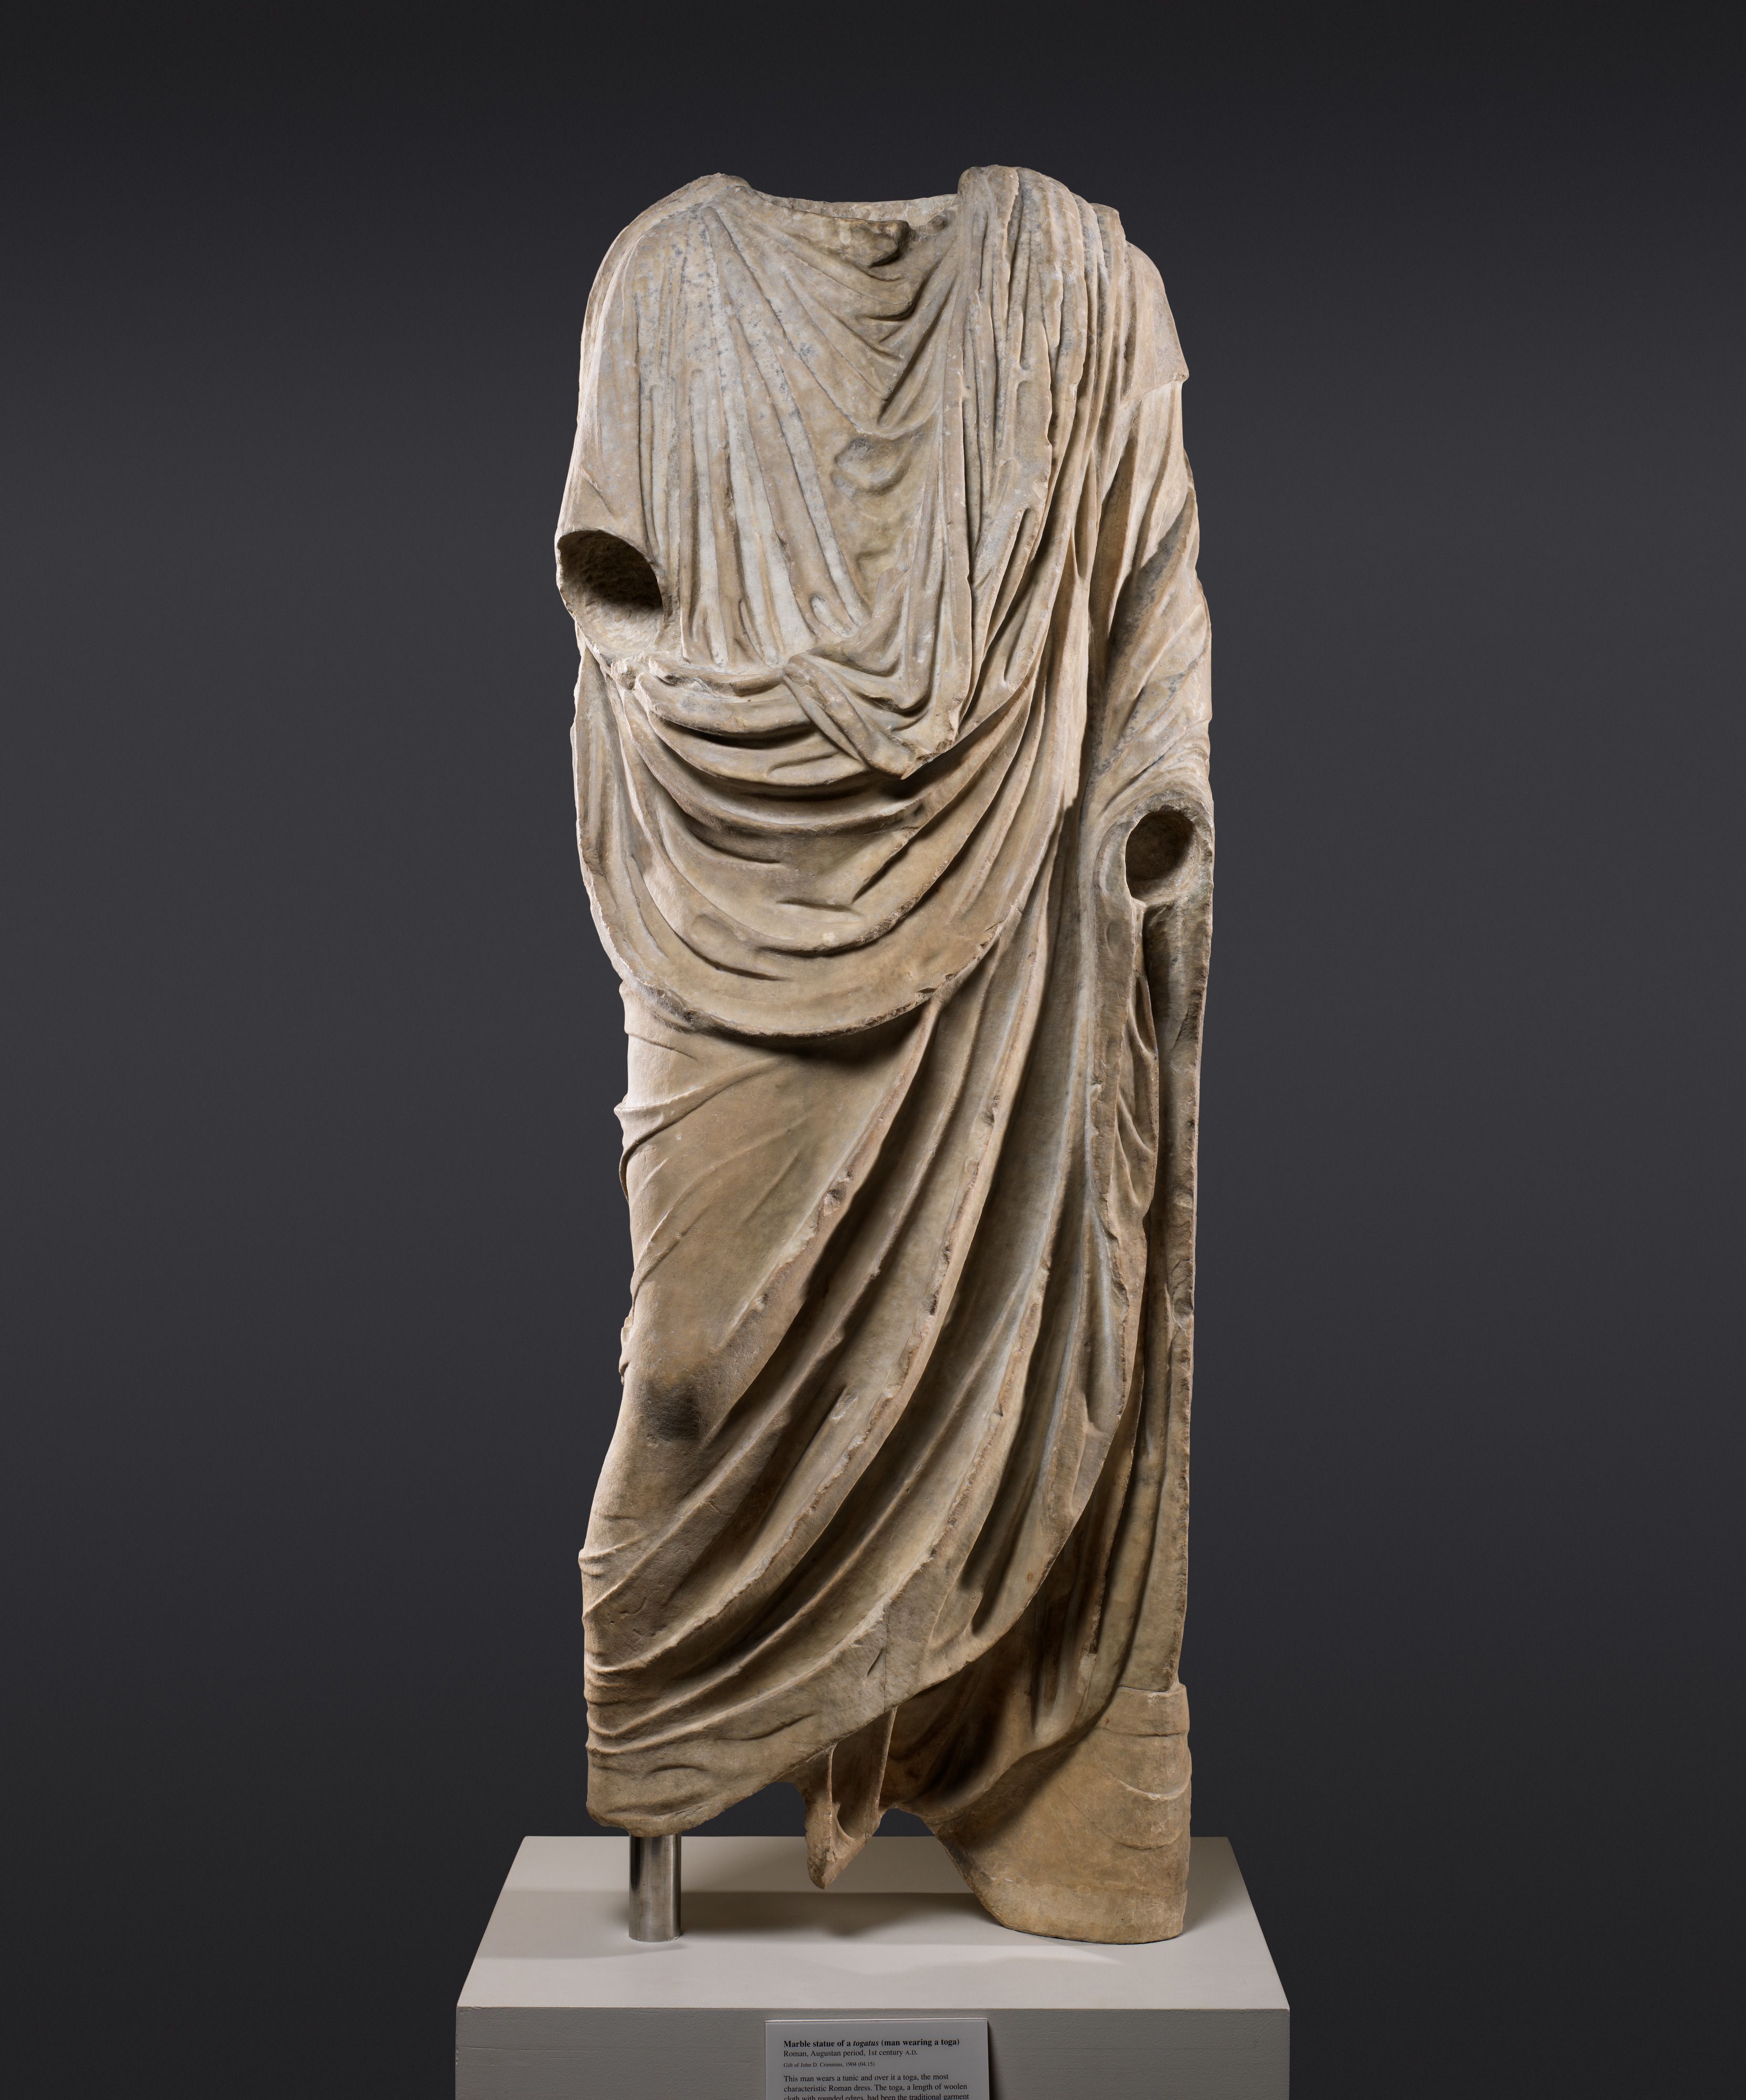 Photo of a marble statue of a togatus (man wearing a toga), 1st century A.D., Metropolitan Museum of Art